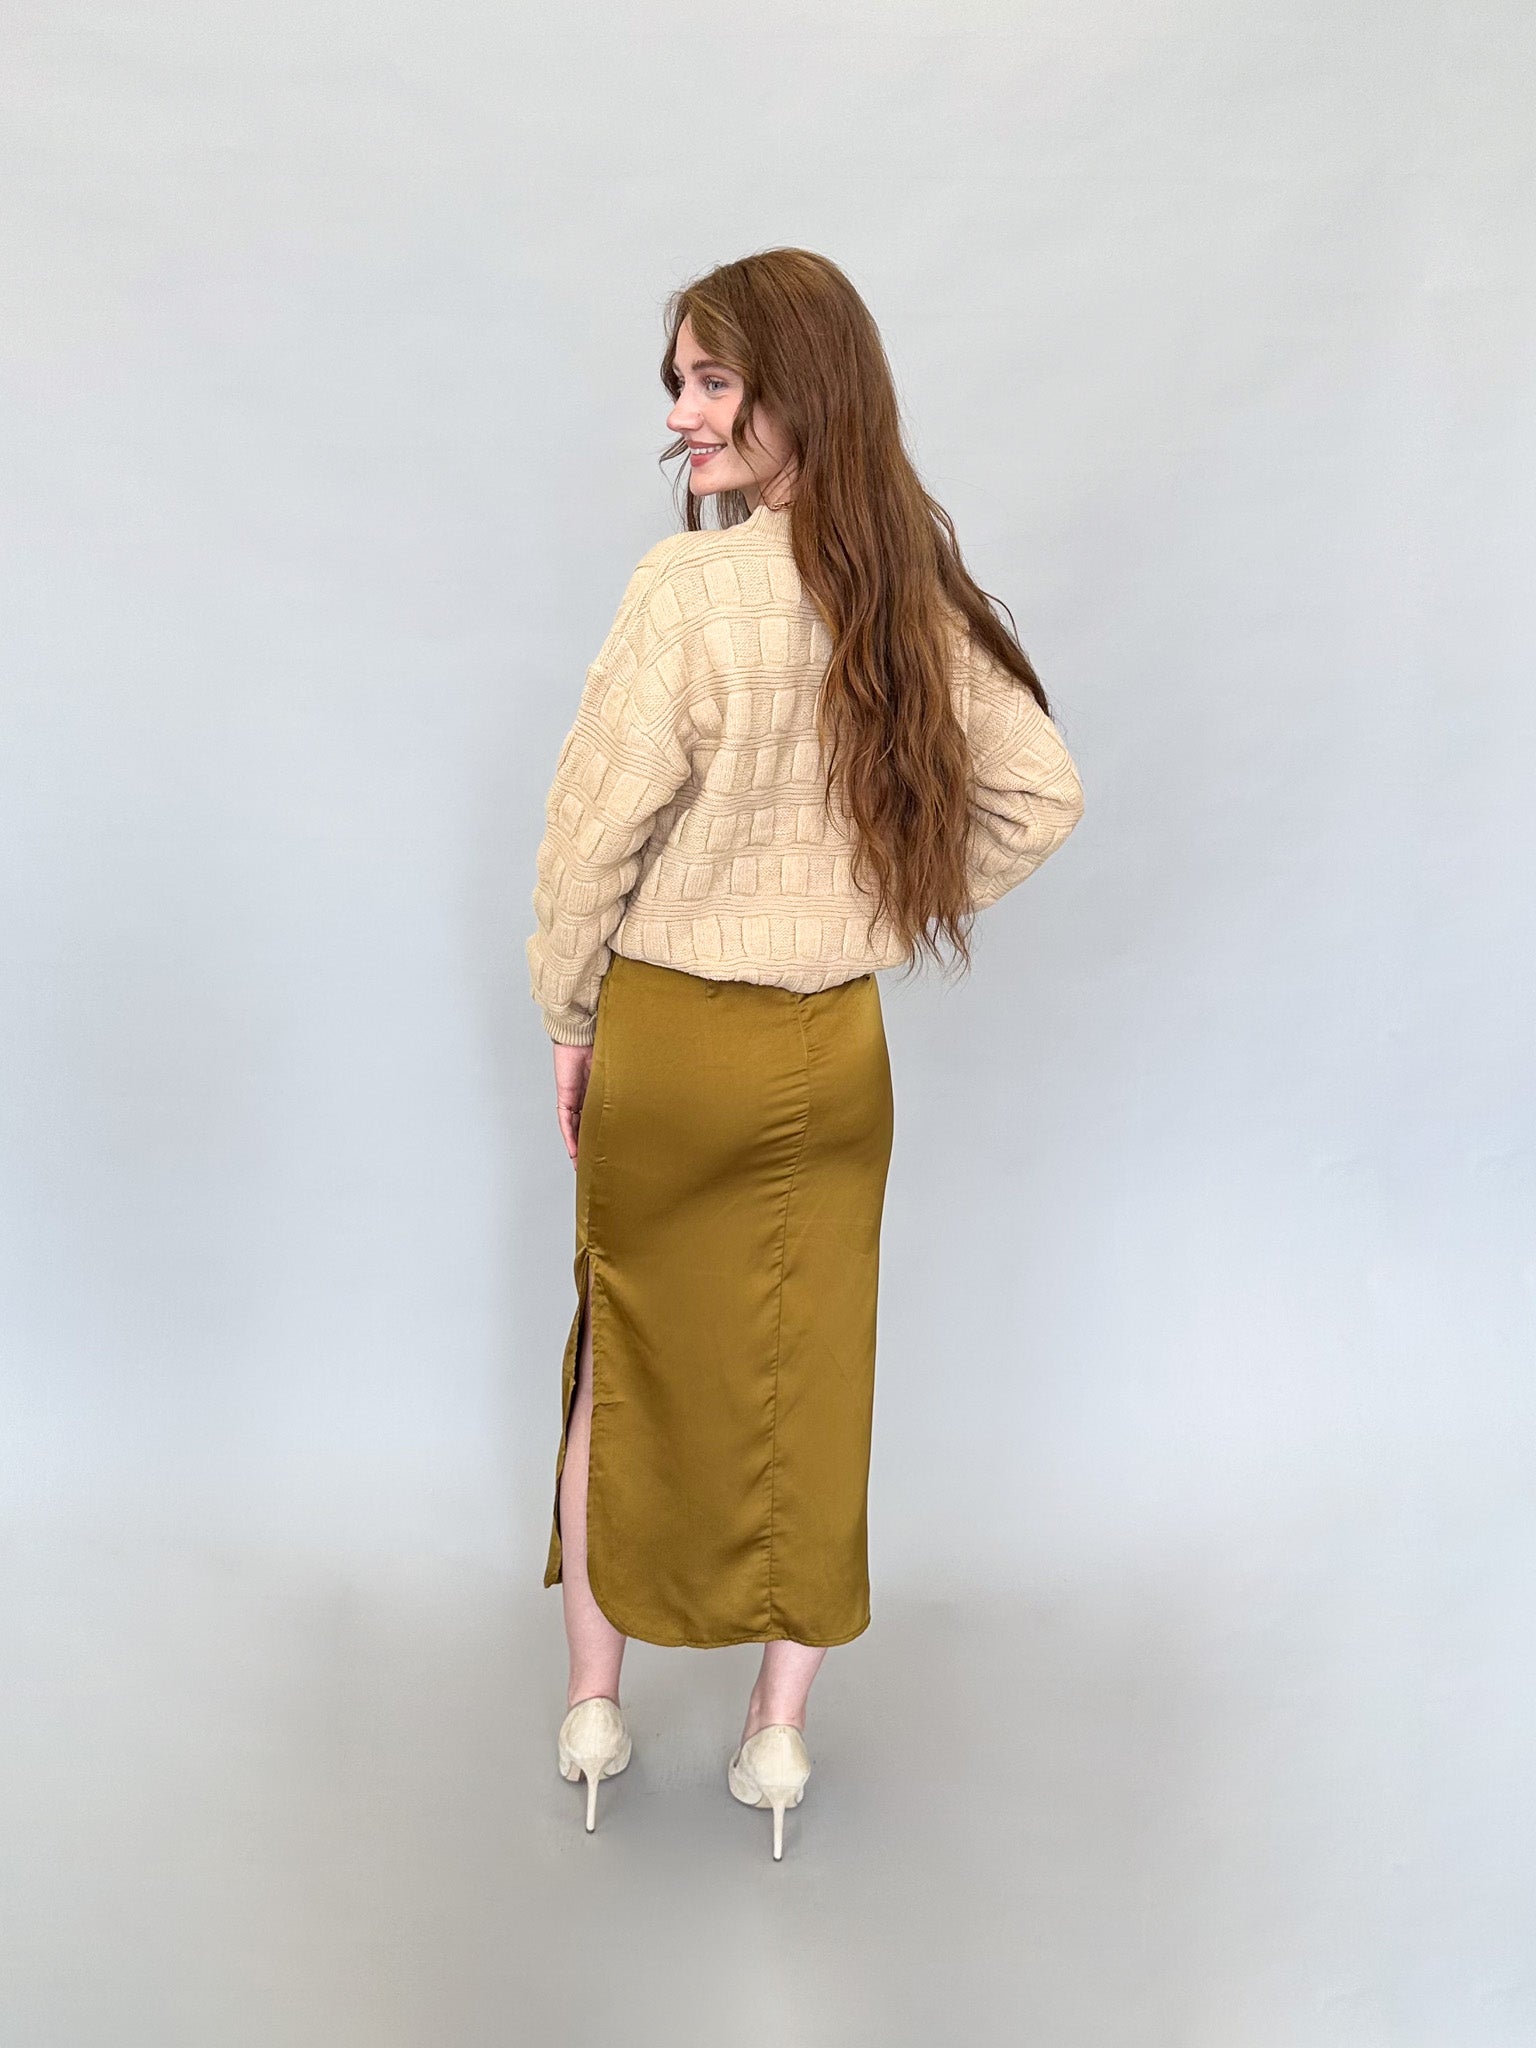 Bring Me To Higher Love Skirt